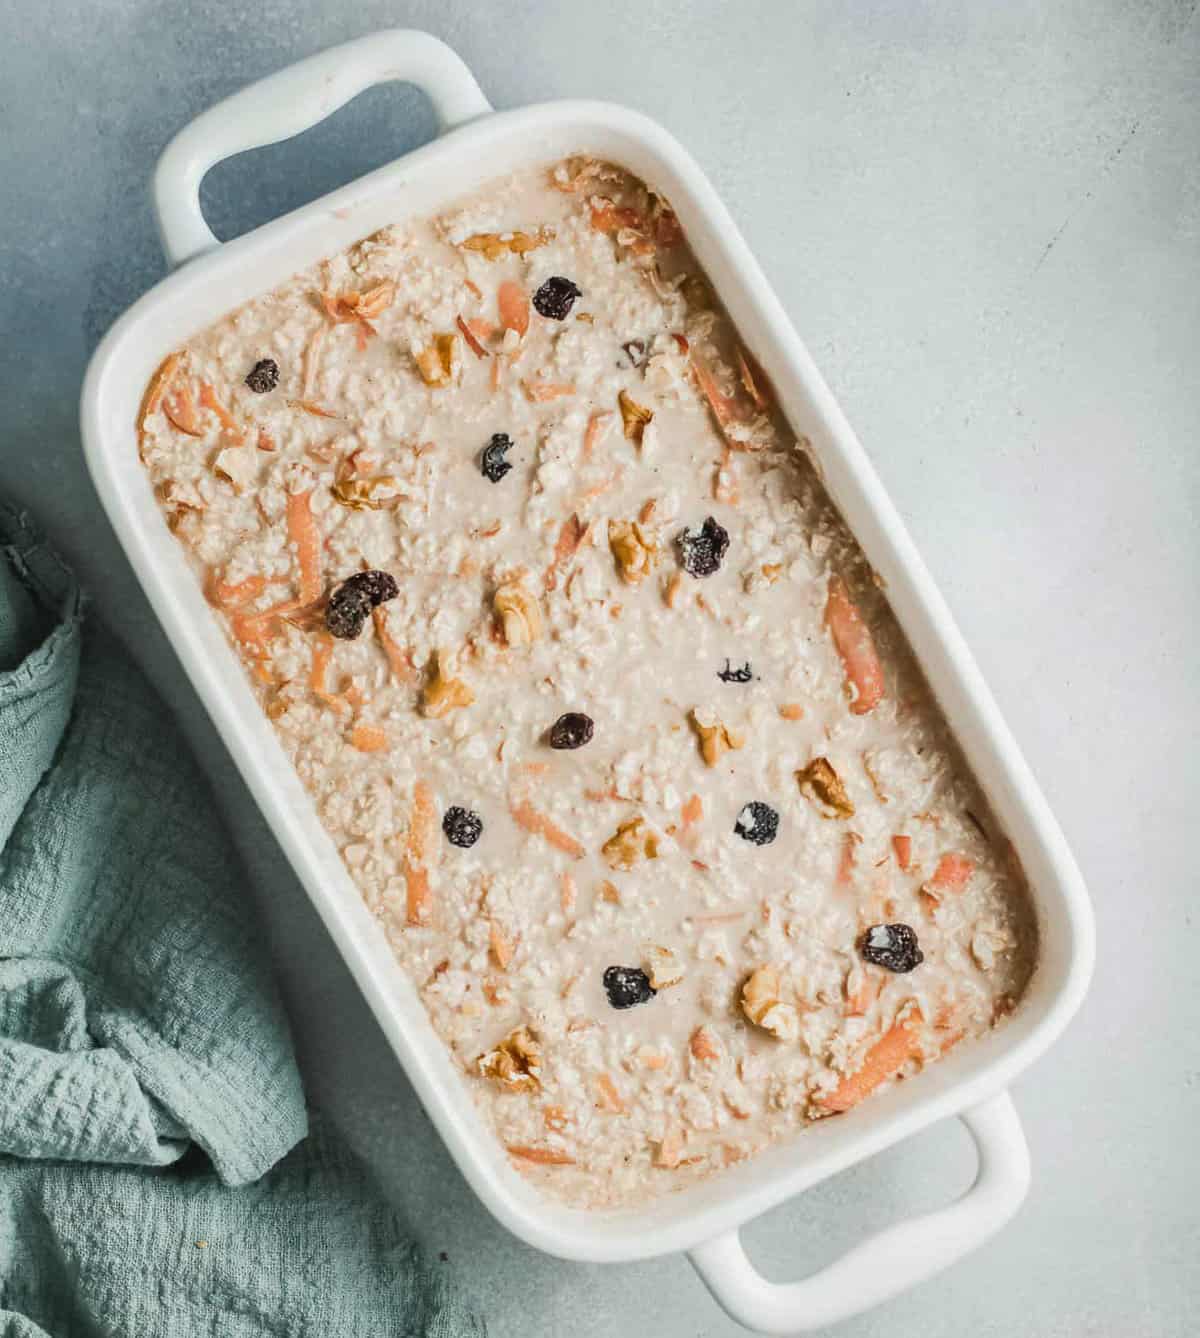 Unbaked oatmeal in a casserole dish.